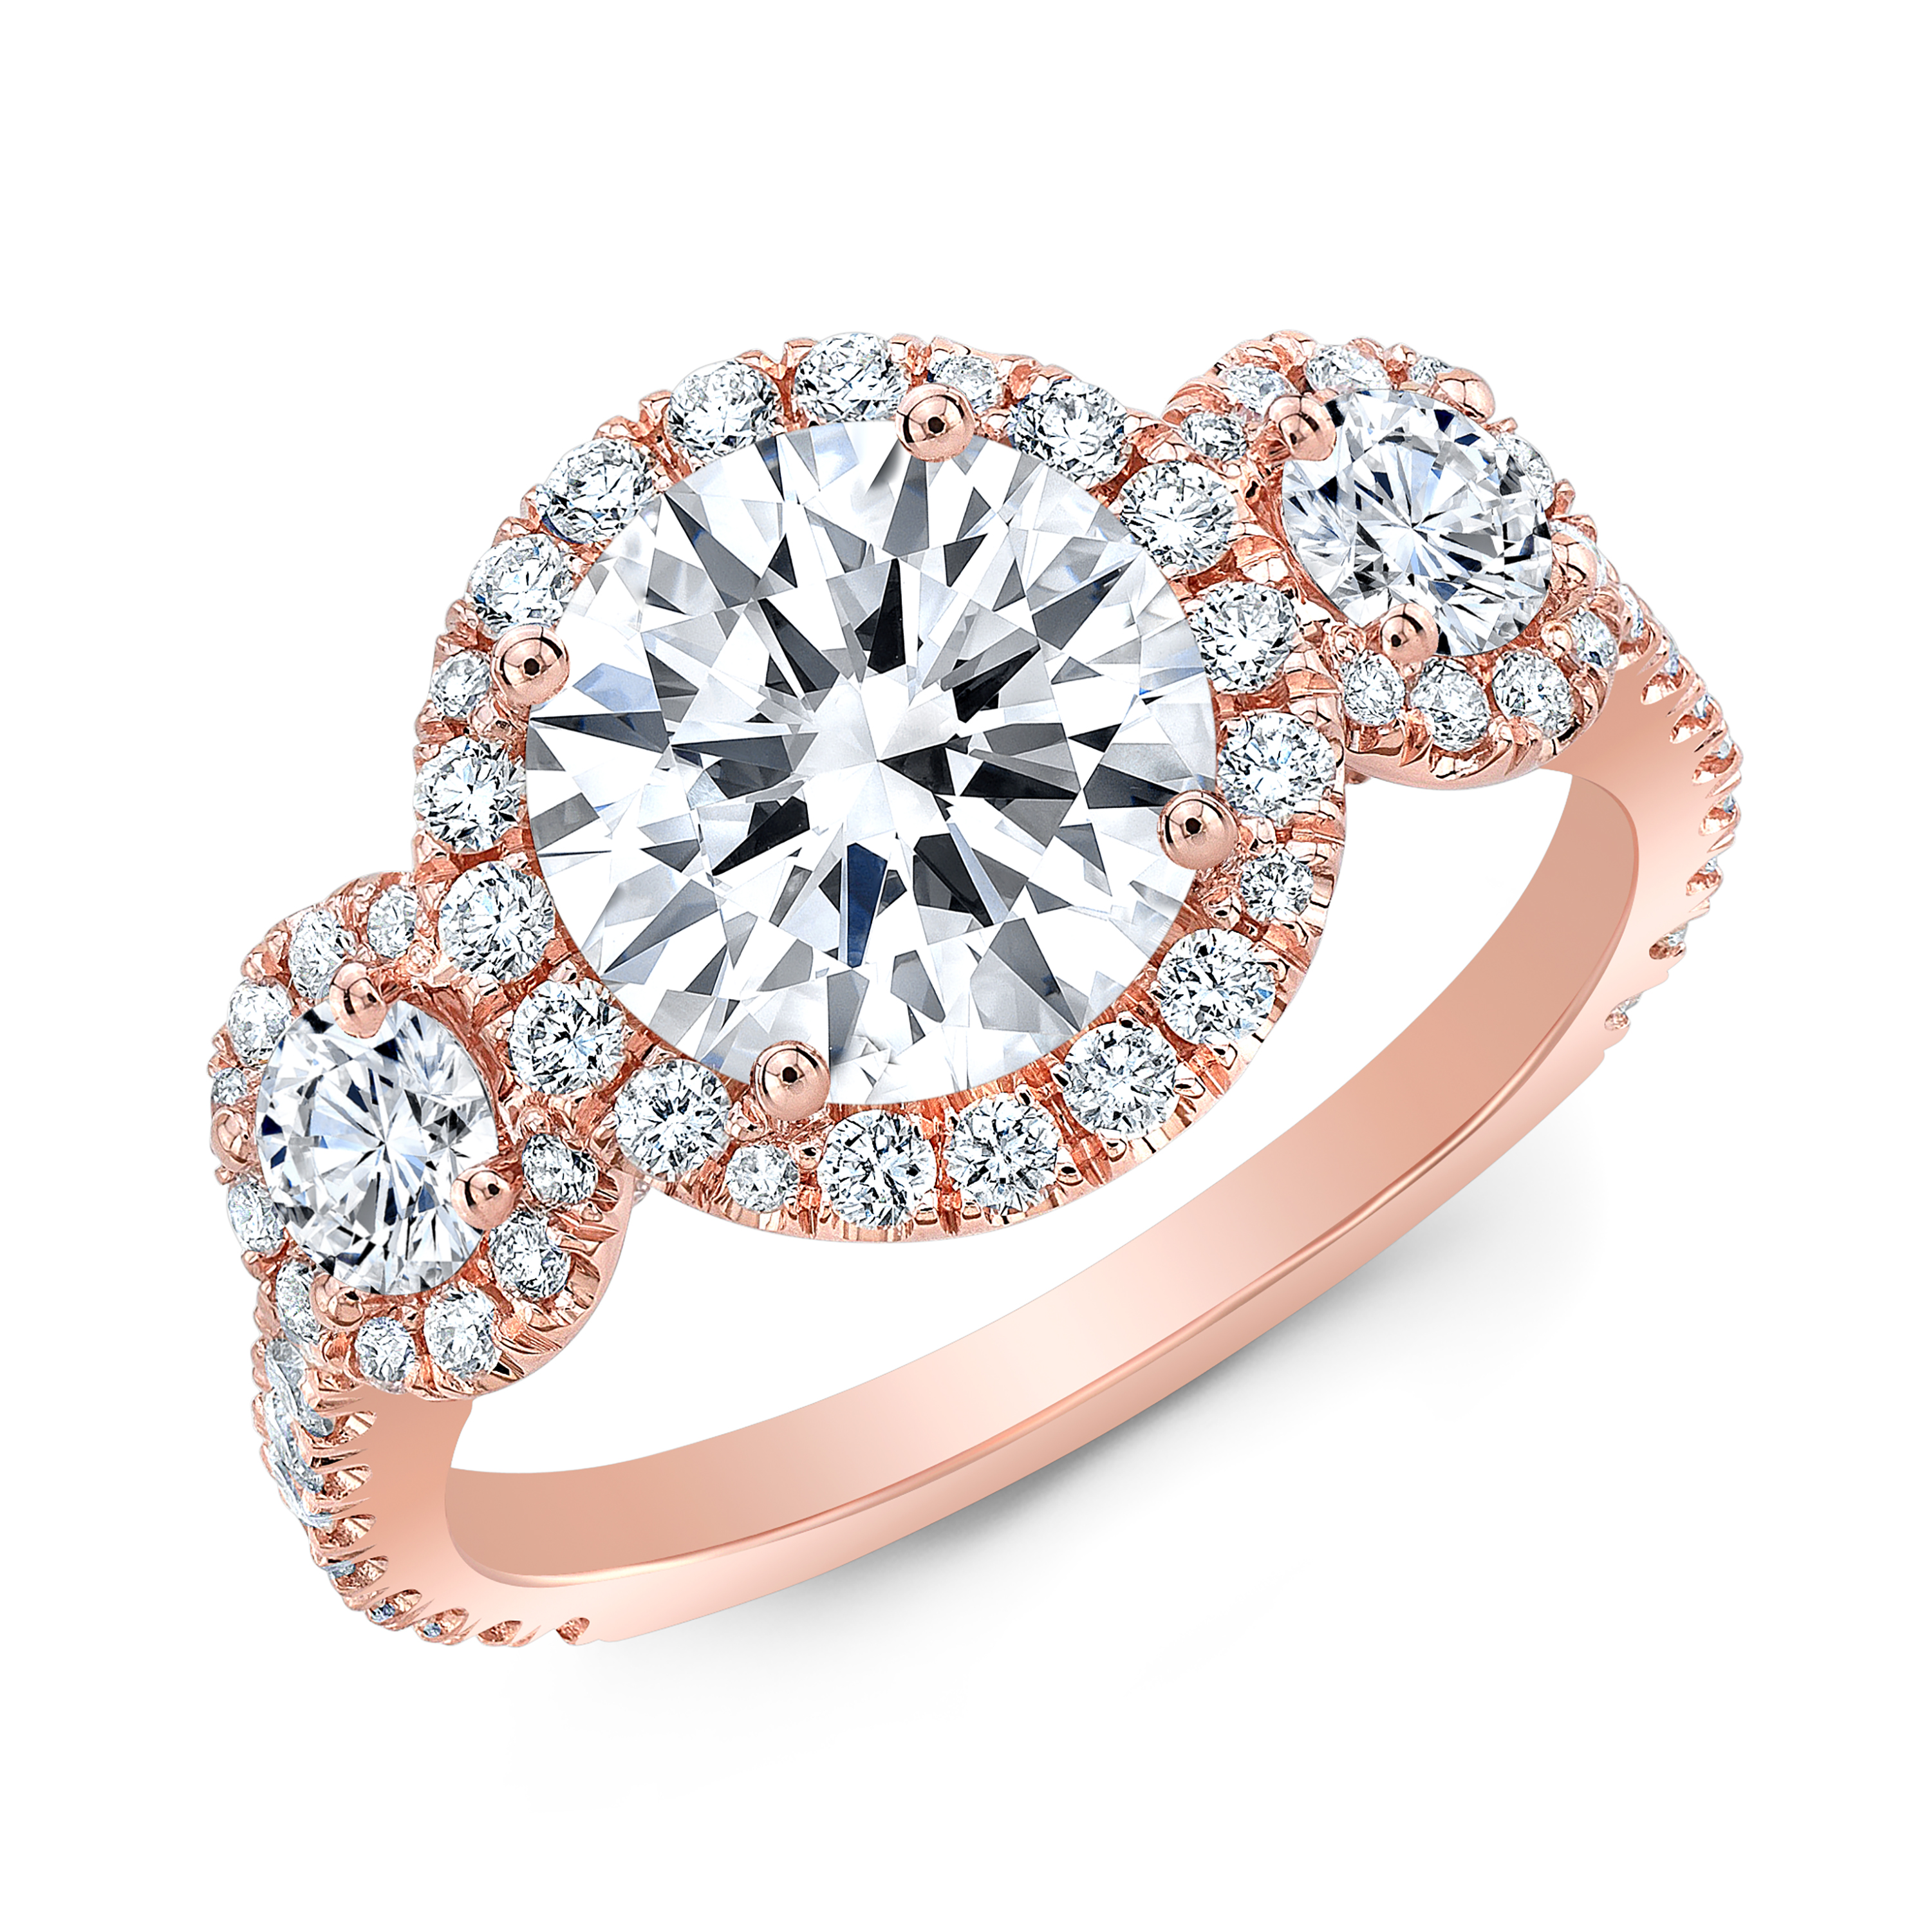 3 Stone Halo Pave Diamond Engagement Ring in rose gold 